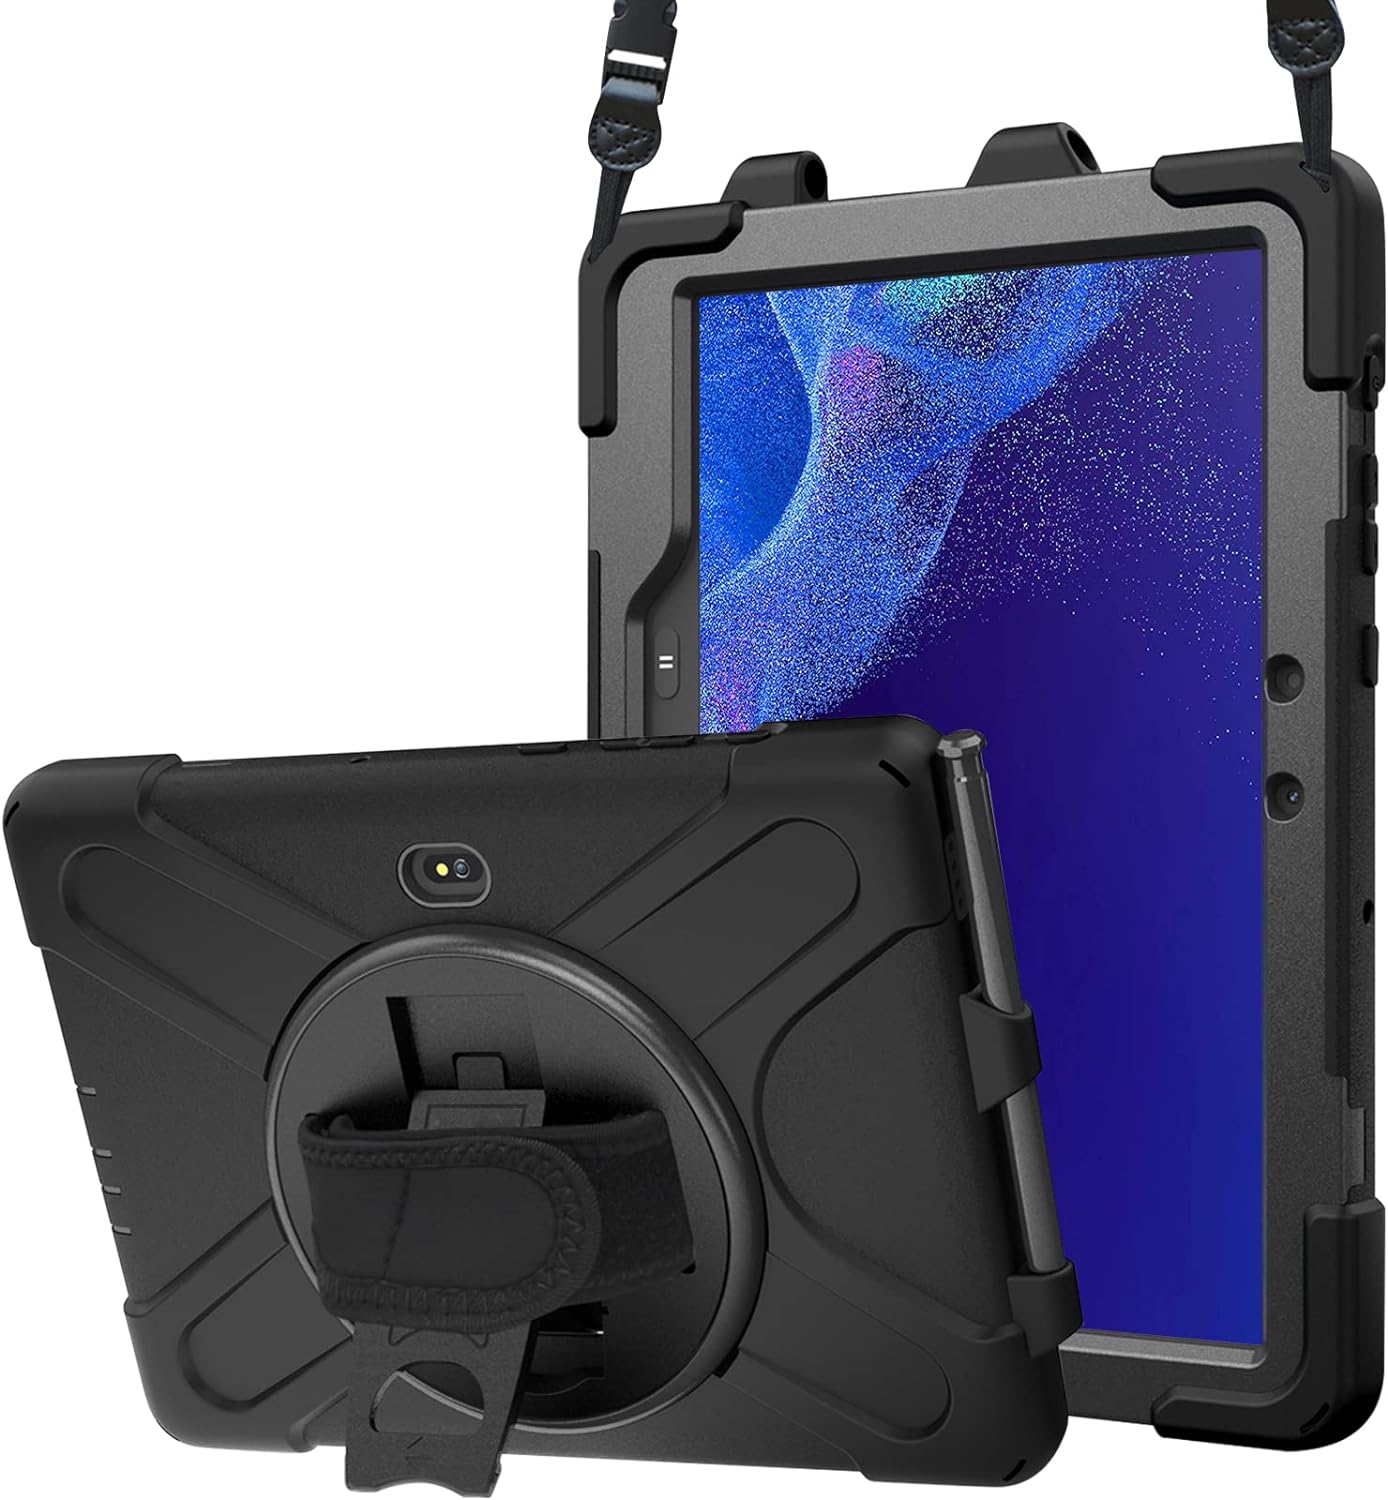 DEFENSE-X Series Case for Samsung Galaxy Tab Active Pro and Active4 Pro - Black